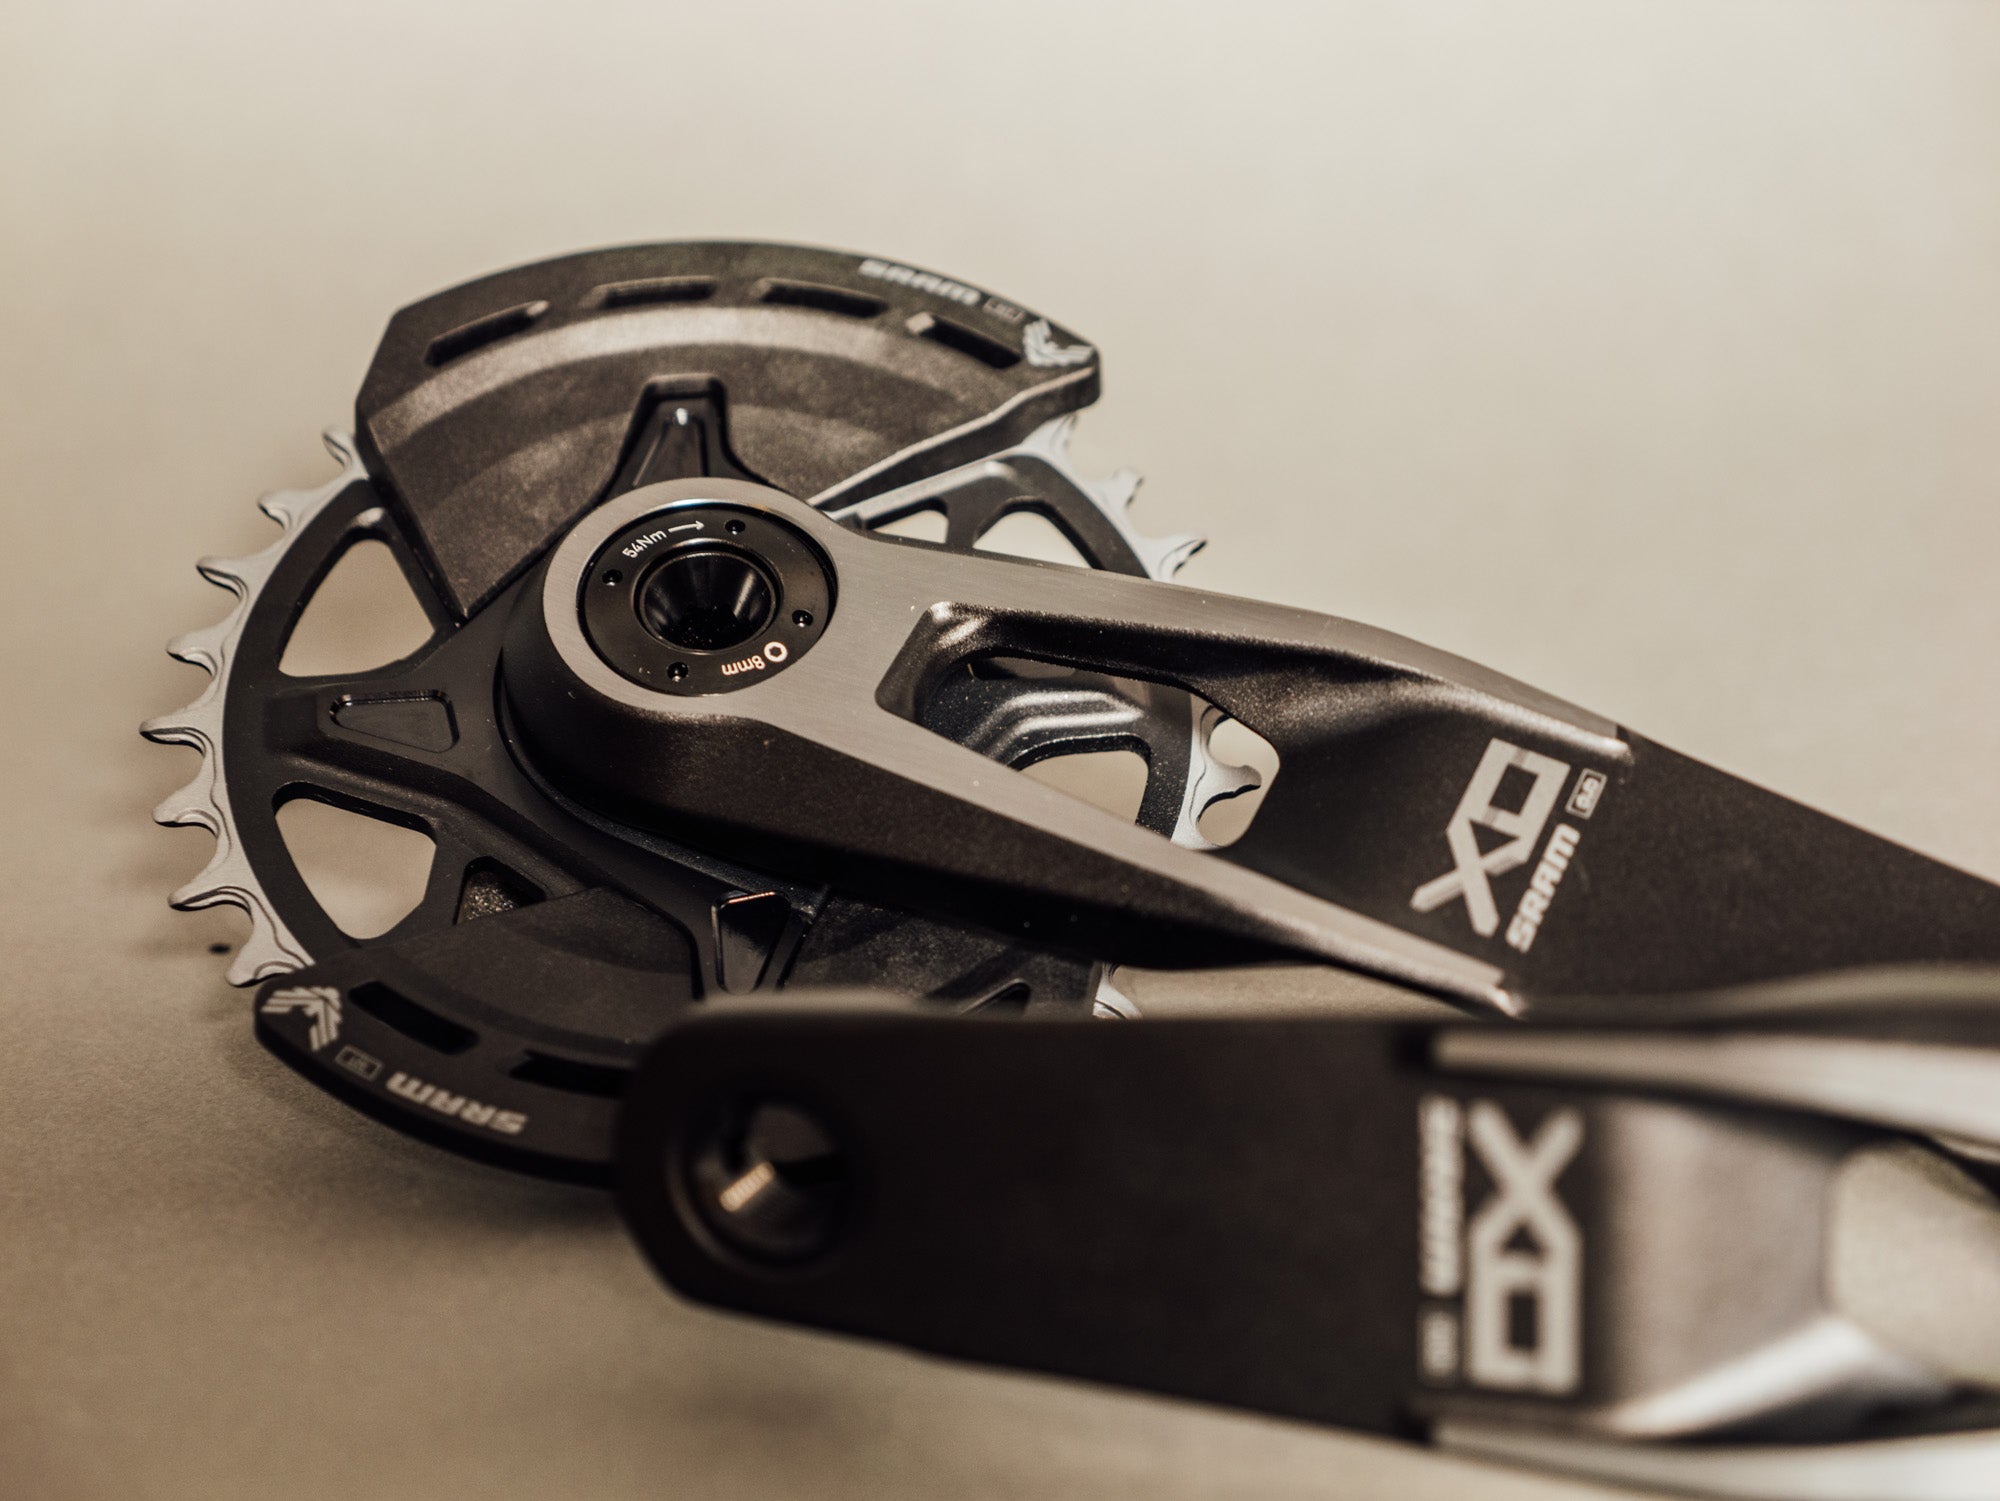 The new aluminum alloy cranks on the Transmission X0 drivetrain are a thing of beauty.